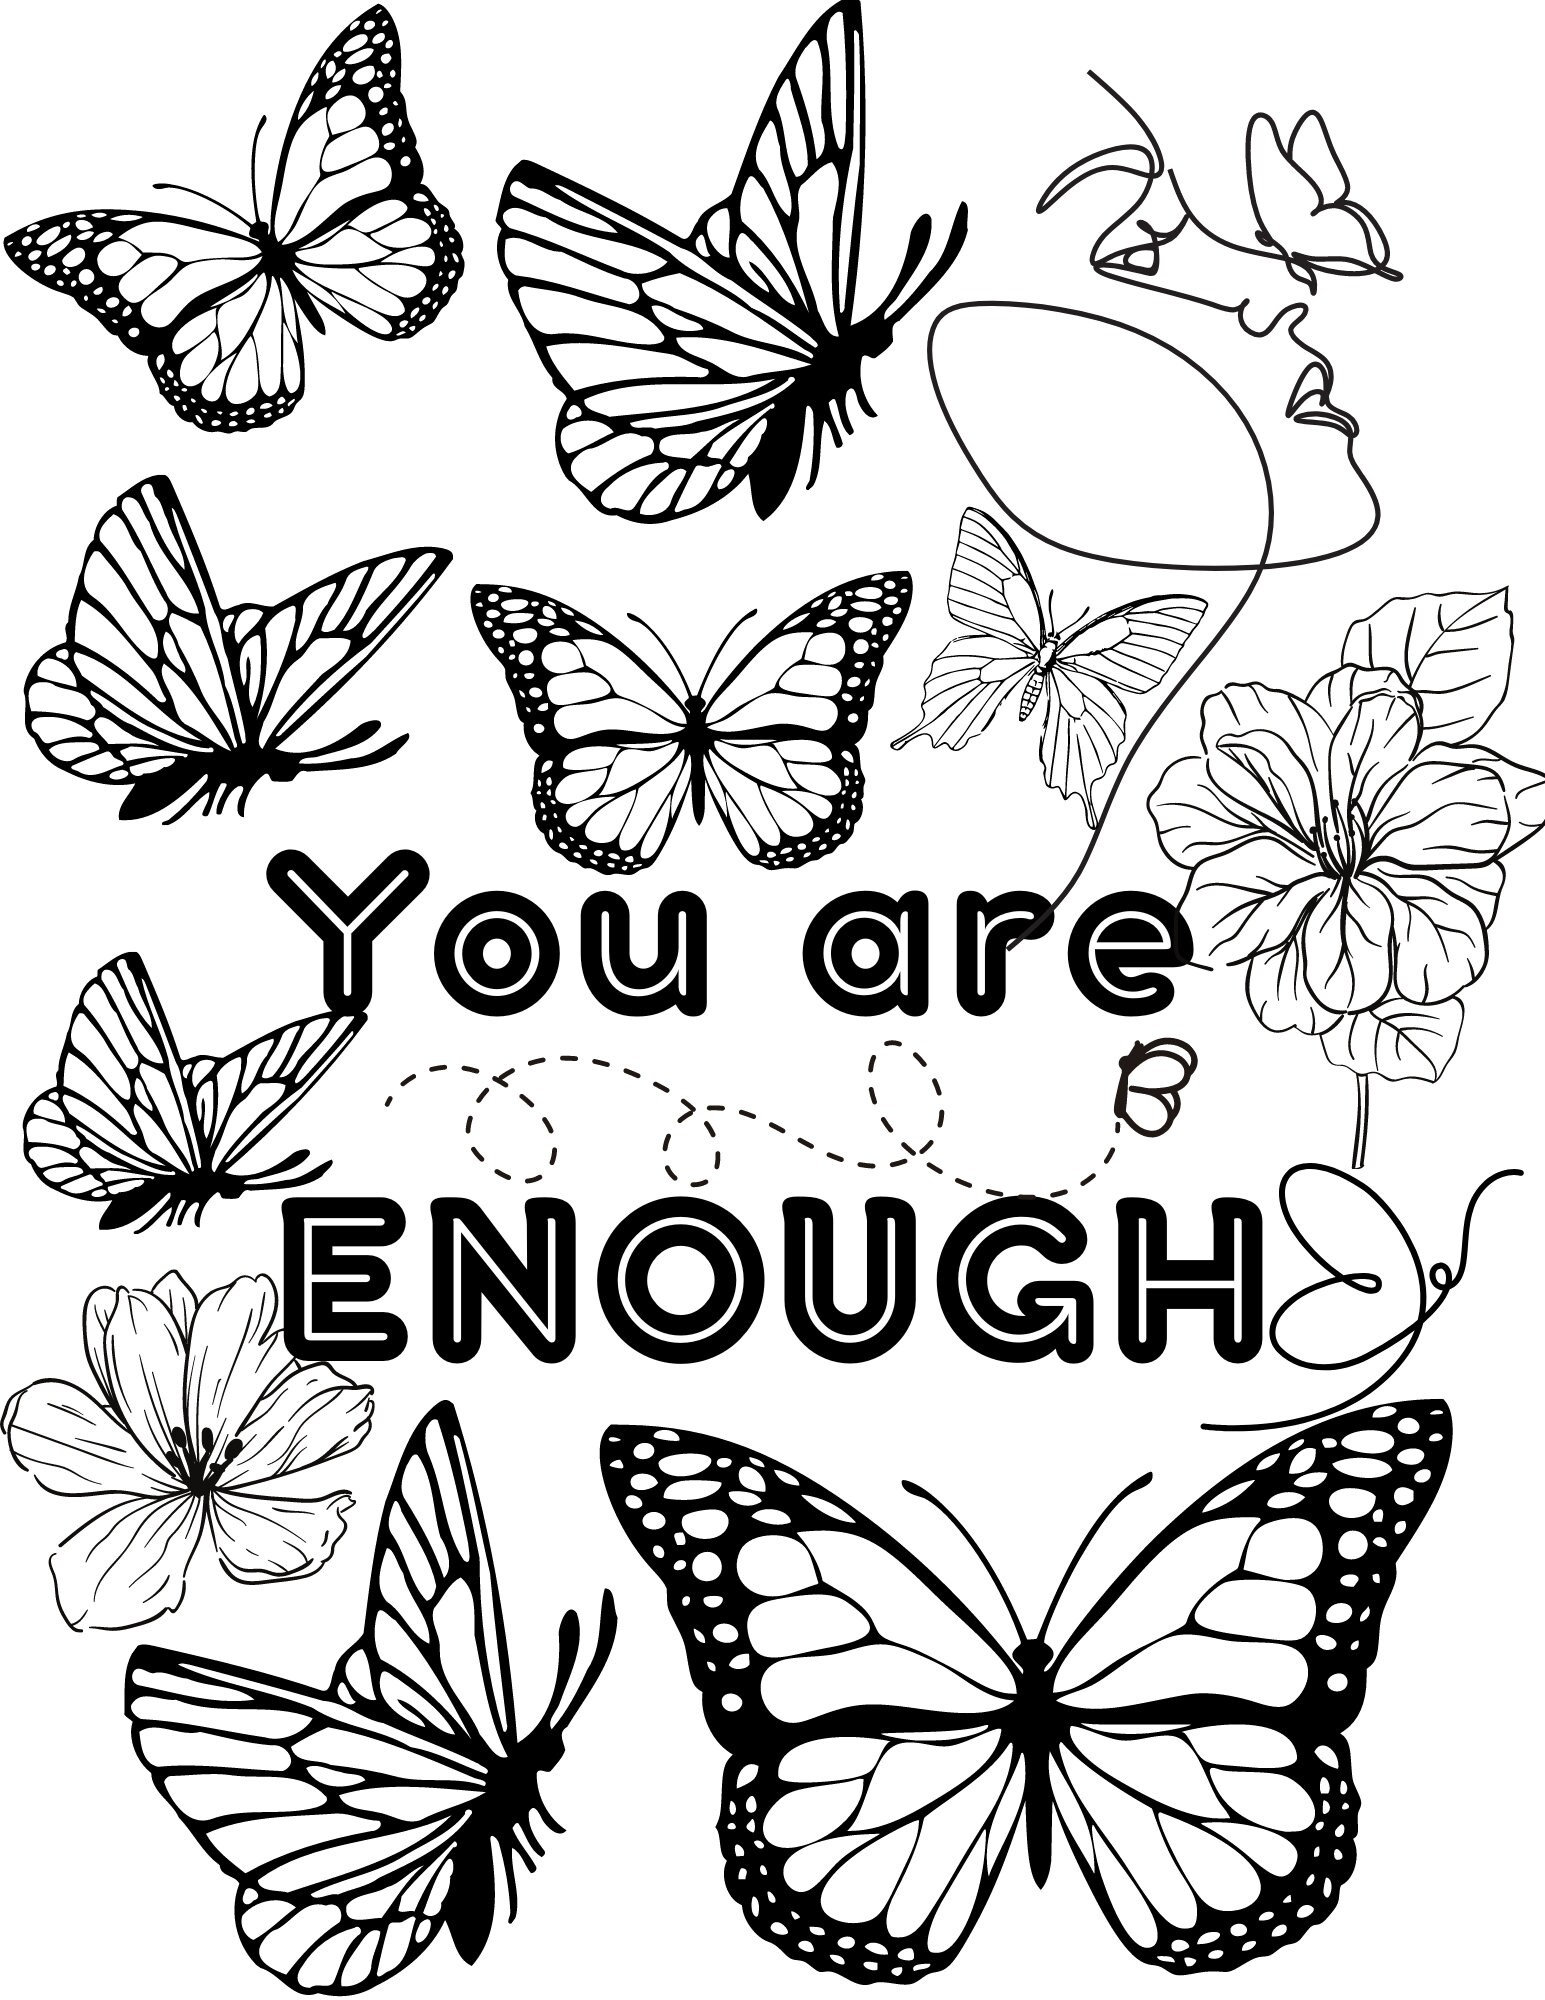 Adult Coloring Pages Mental Health Coloring Pages 5 - Etsy